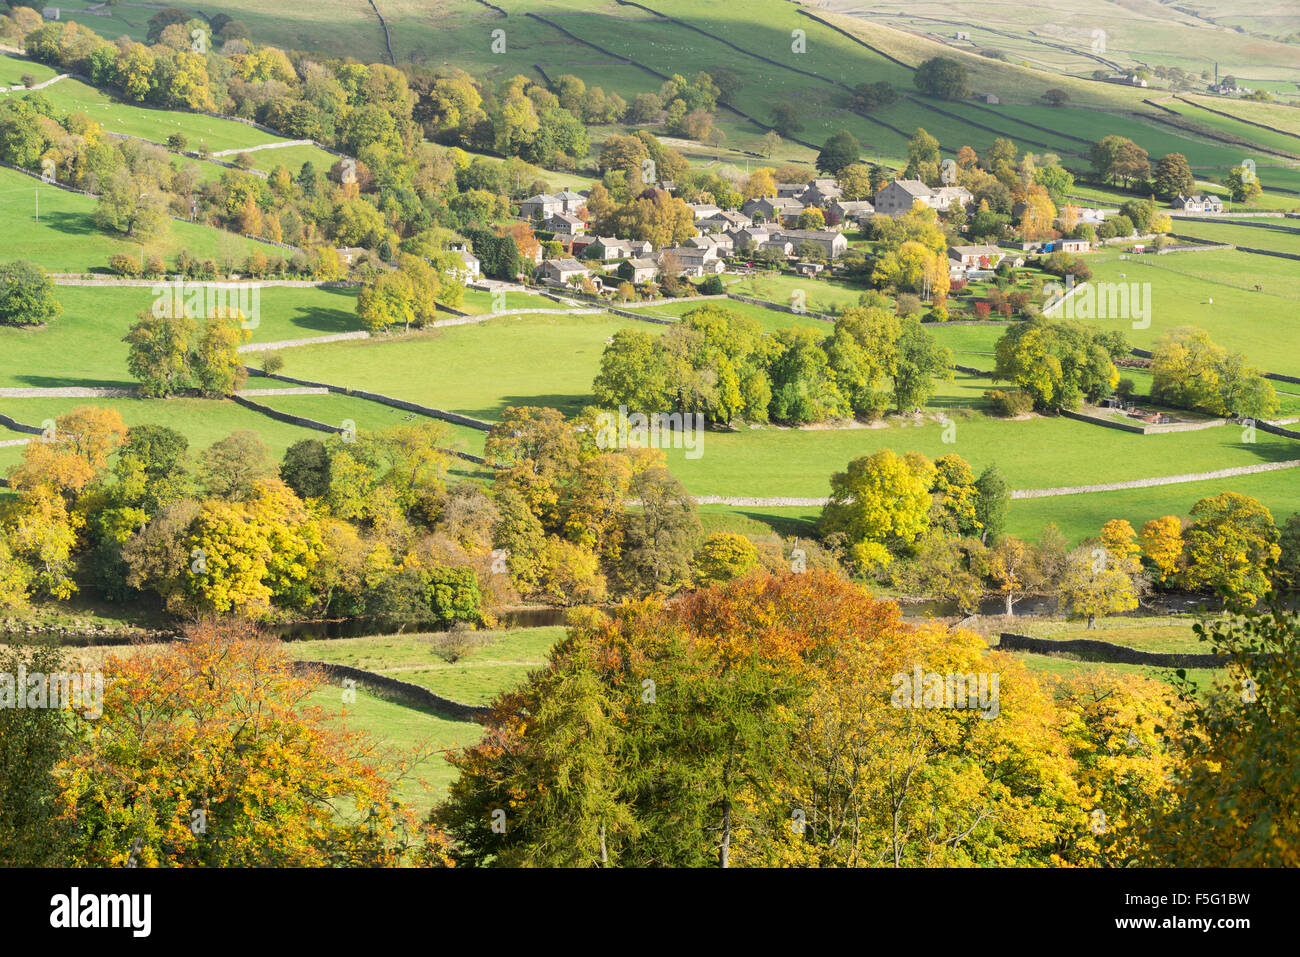 Appletreewick Dorf in Wharfedale, The Yorkshire Dales, England. Stockfoto